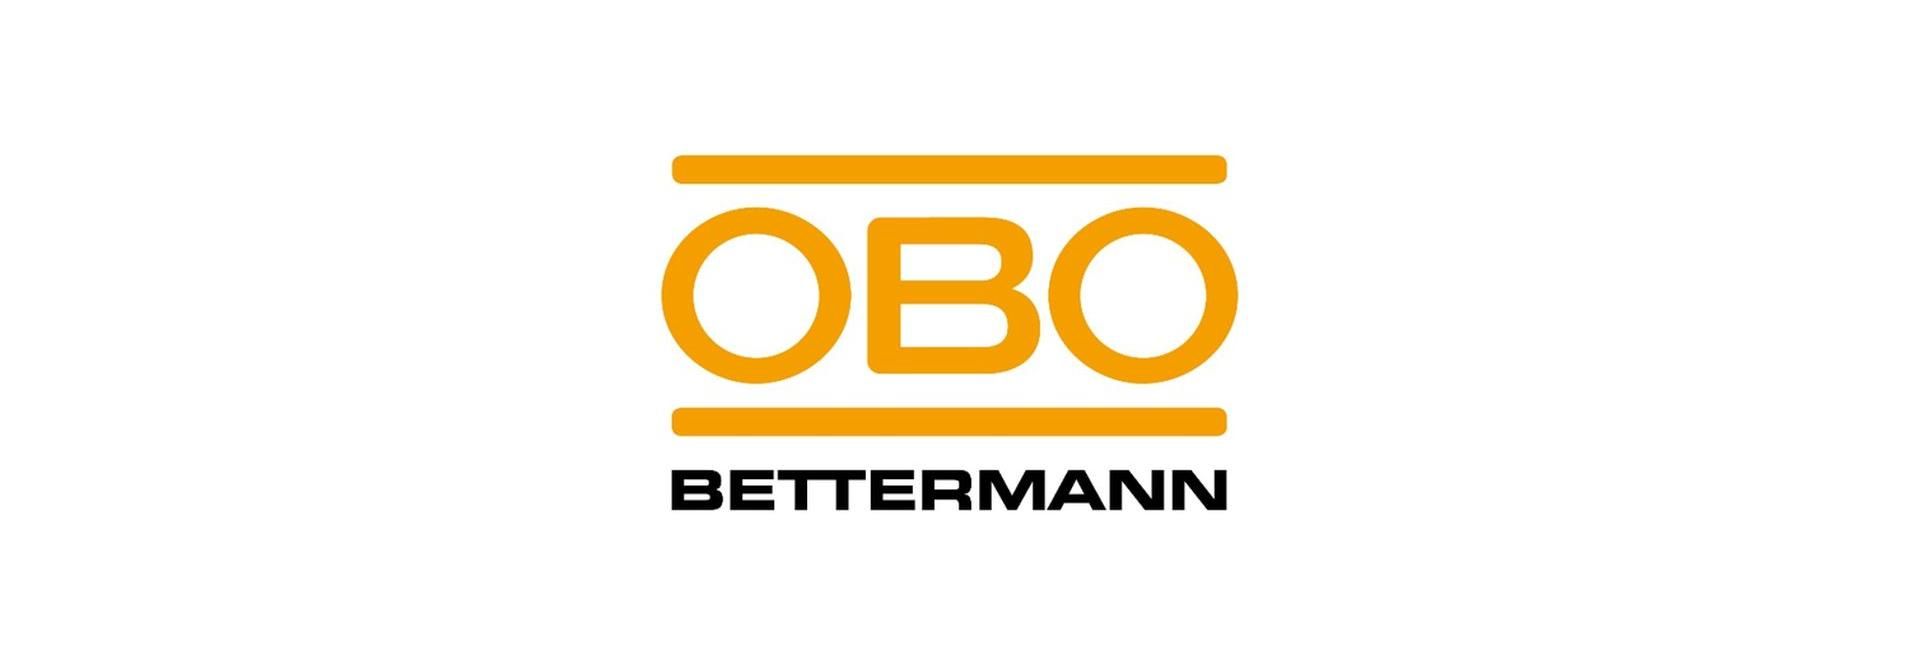 OBO Bettermann Celebrates 110th Anniversary With Large-Scale Developments